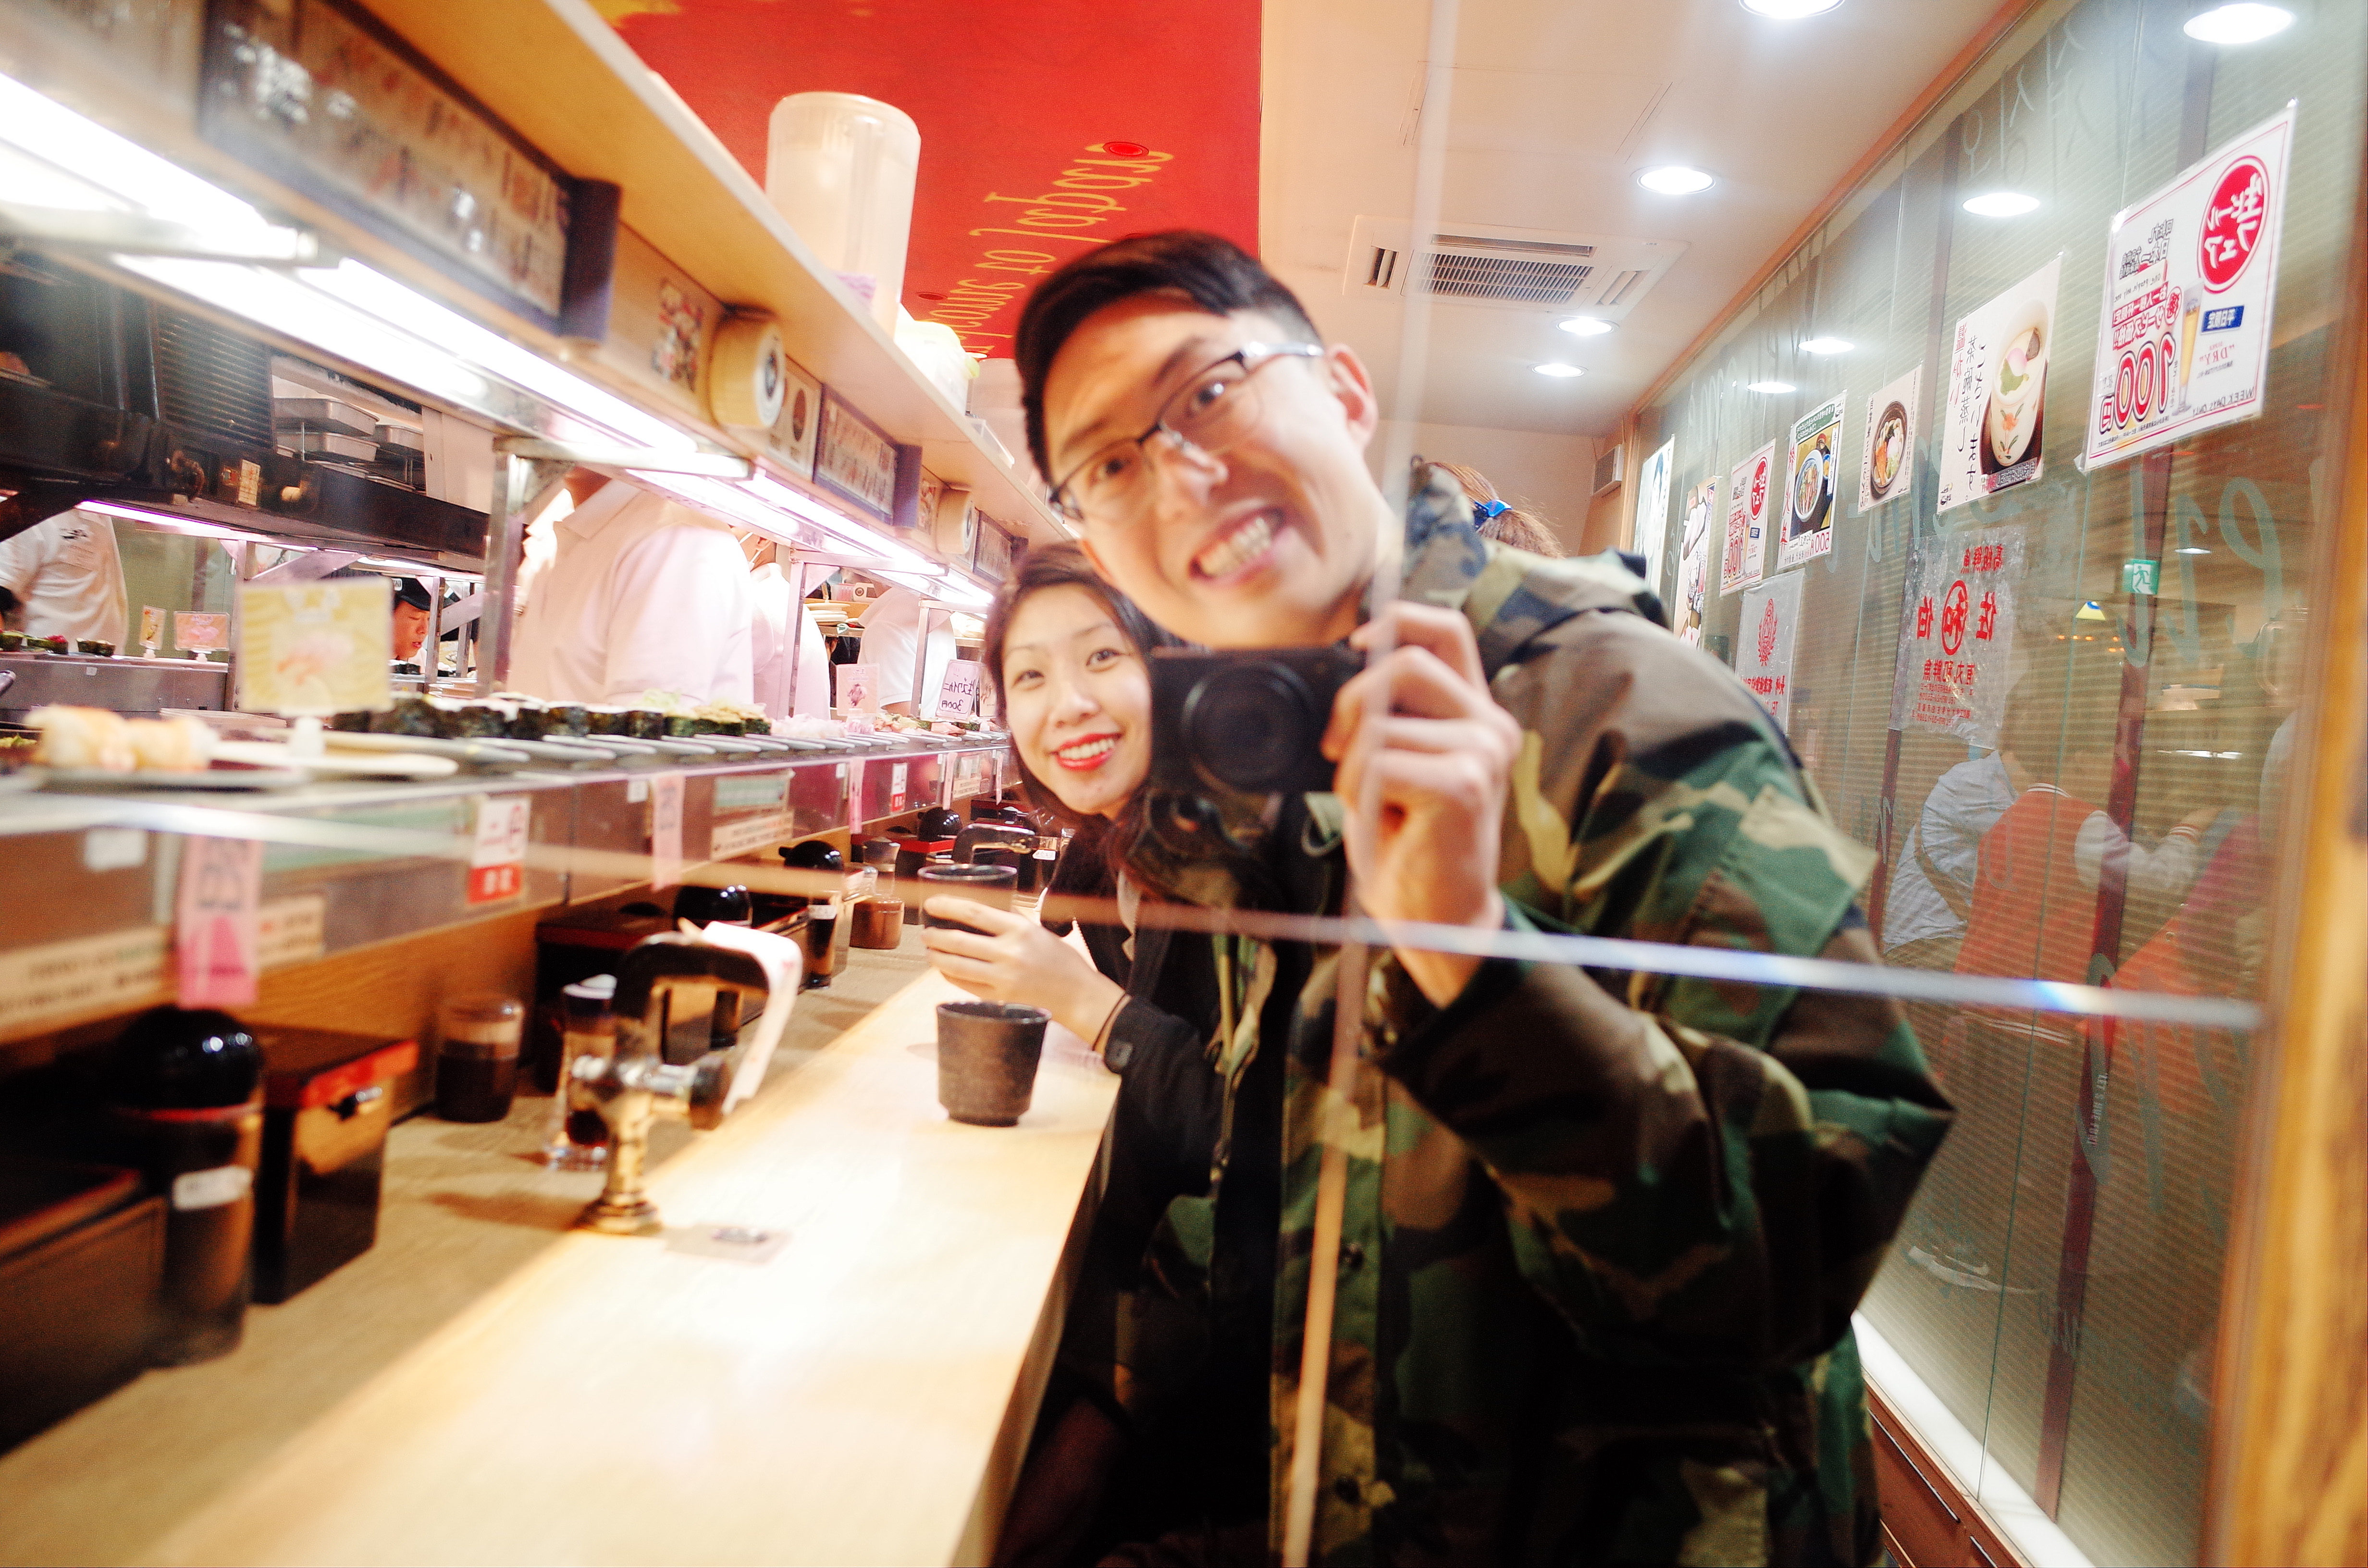 Selfie in the mirror with Cindy at conveyer belt sushi. Osaka, 2018